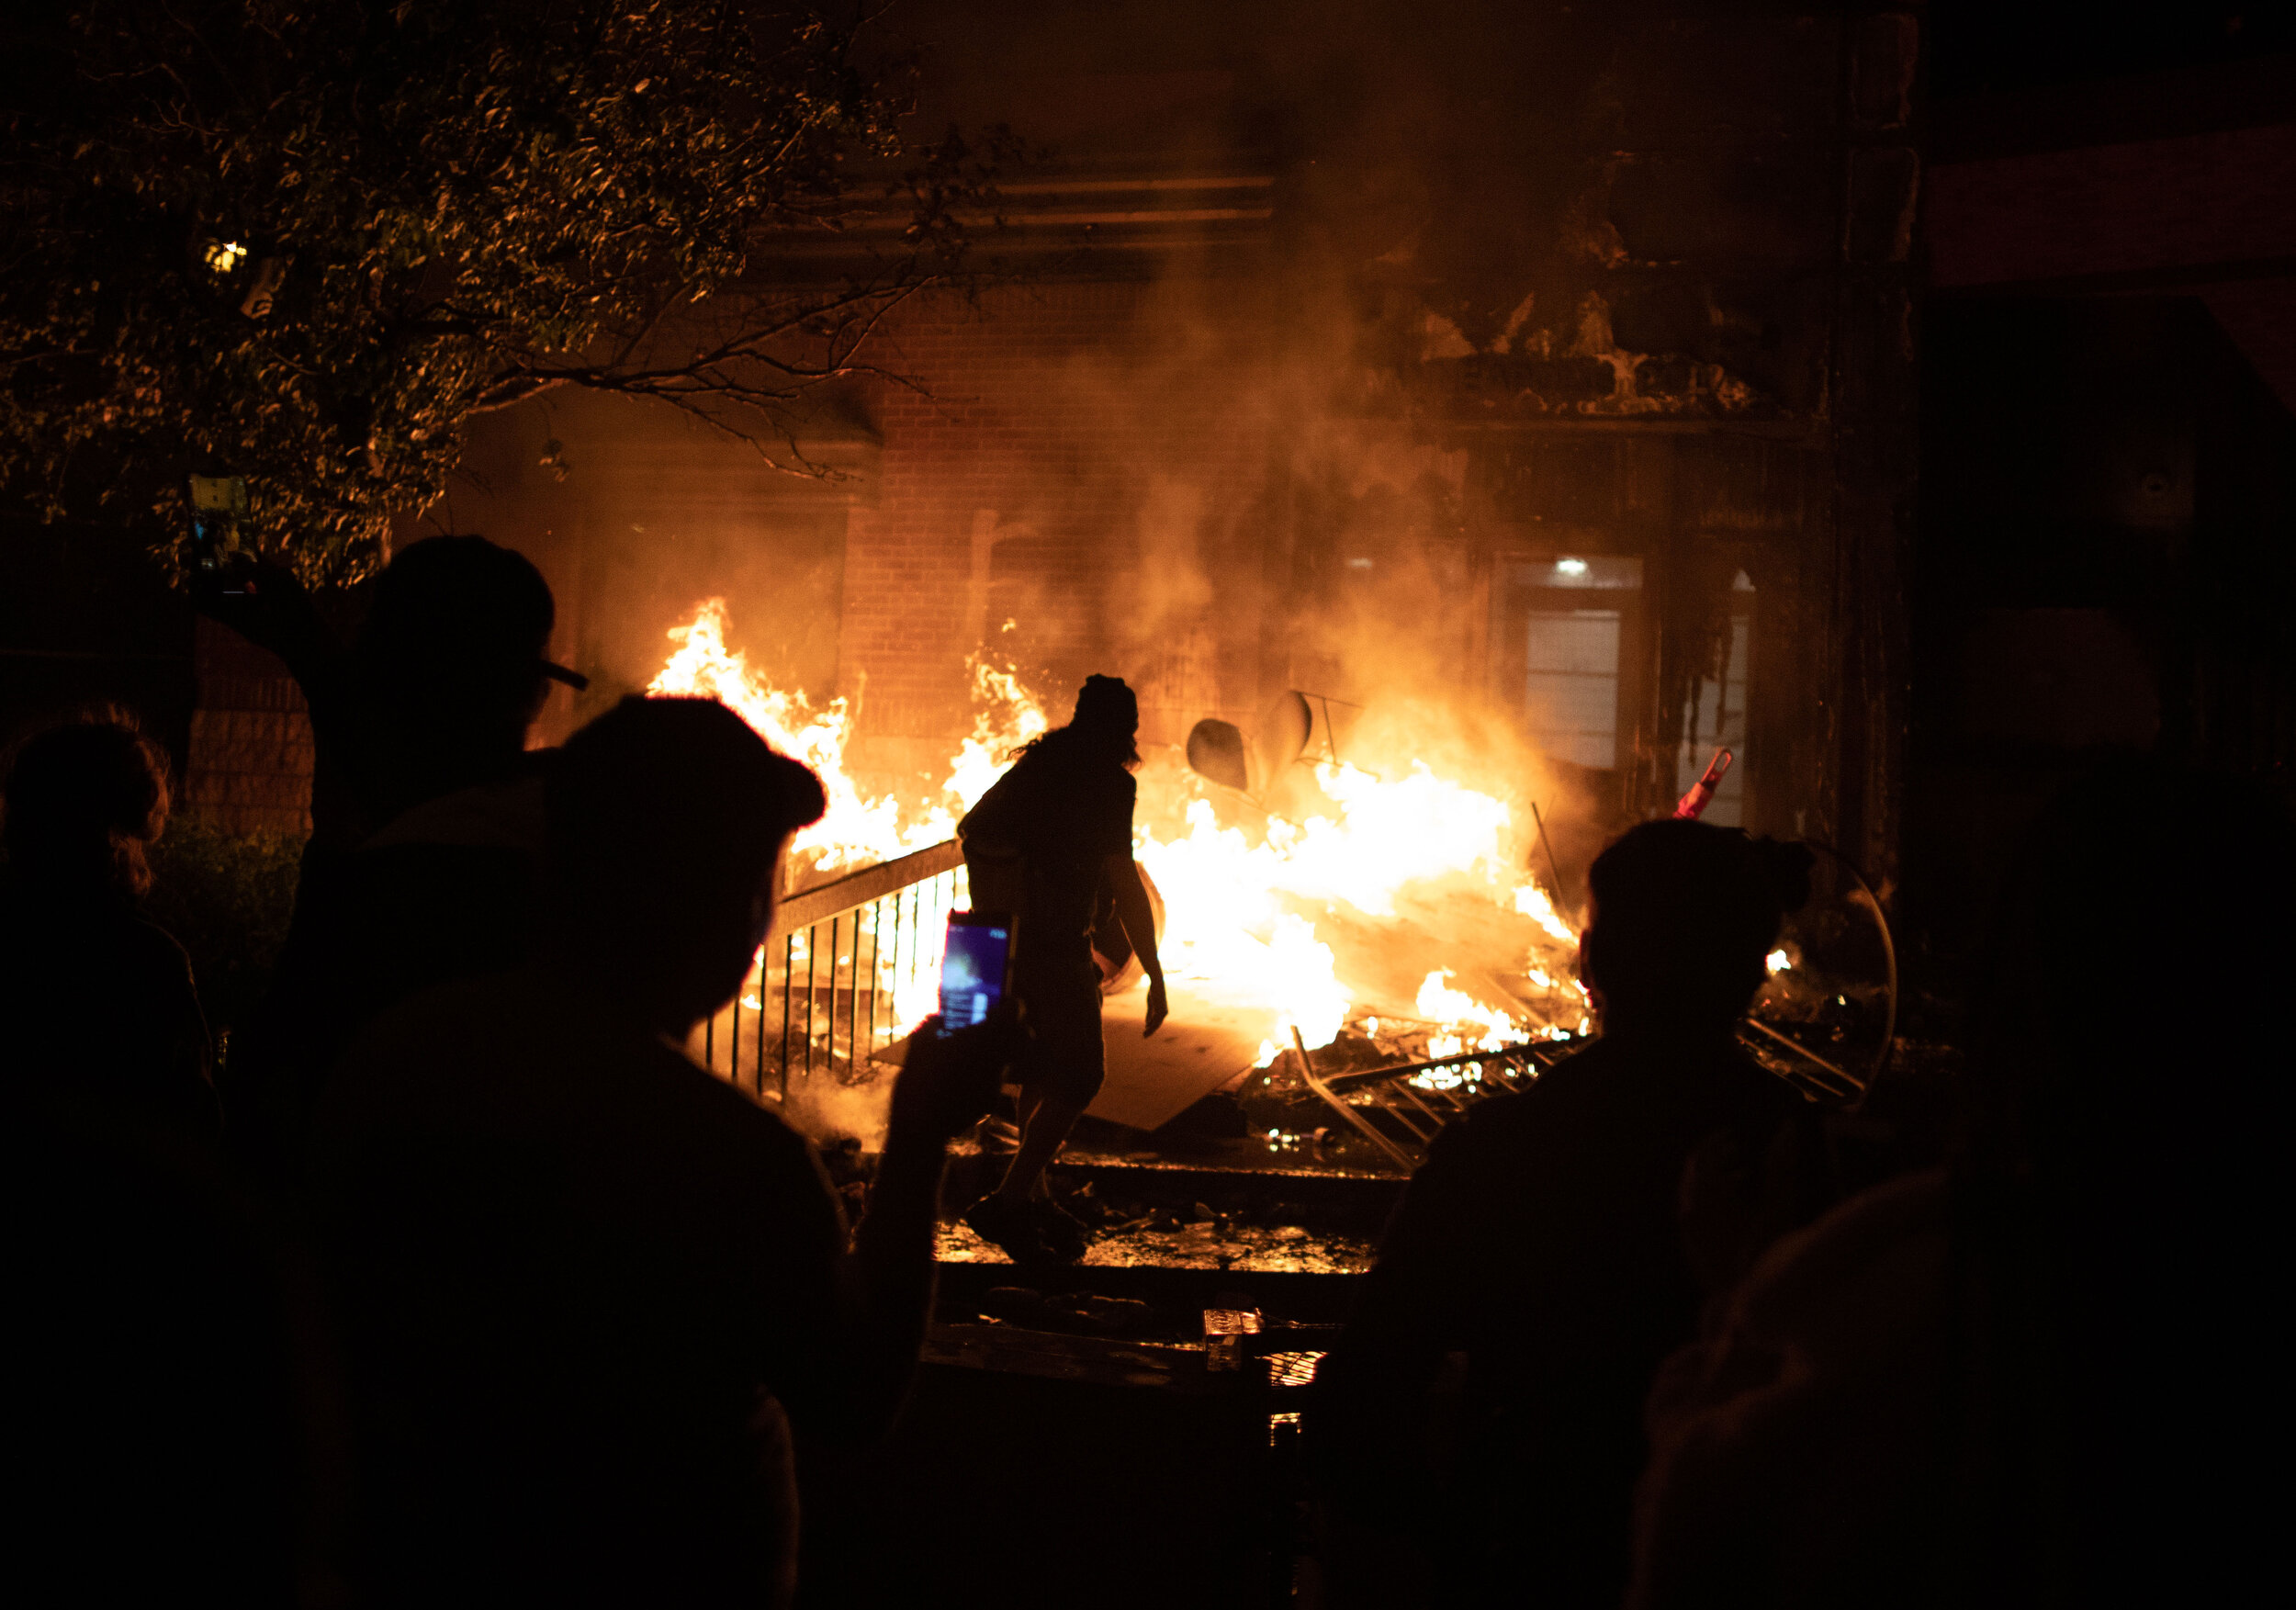  Frozen in mid air, a chair is thrown into a fire by a protester during a riot in Minneapolis at the 3r police precinct over the killing of George Floyd on May 28, 2020. 